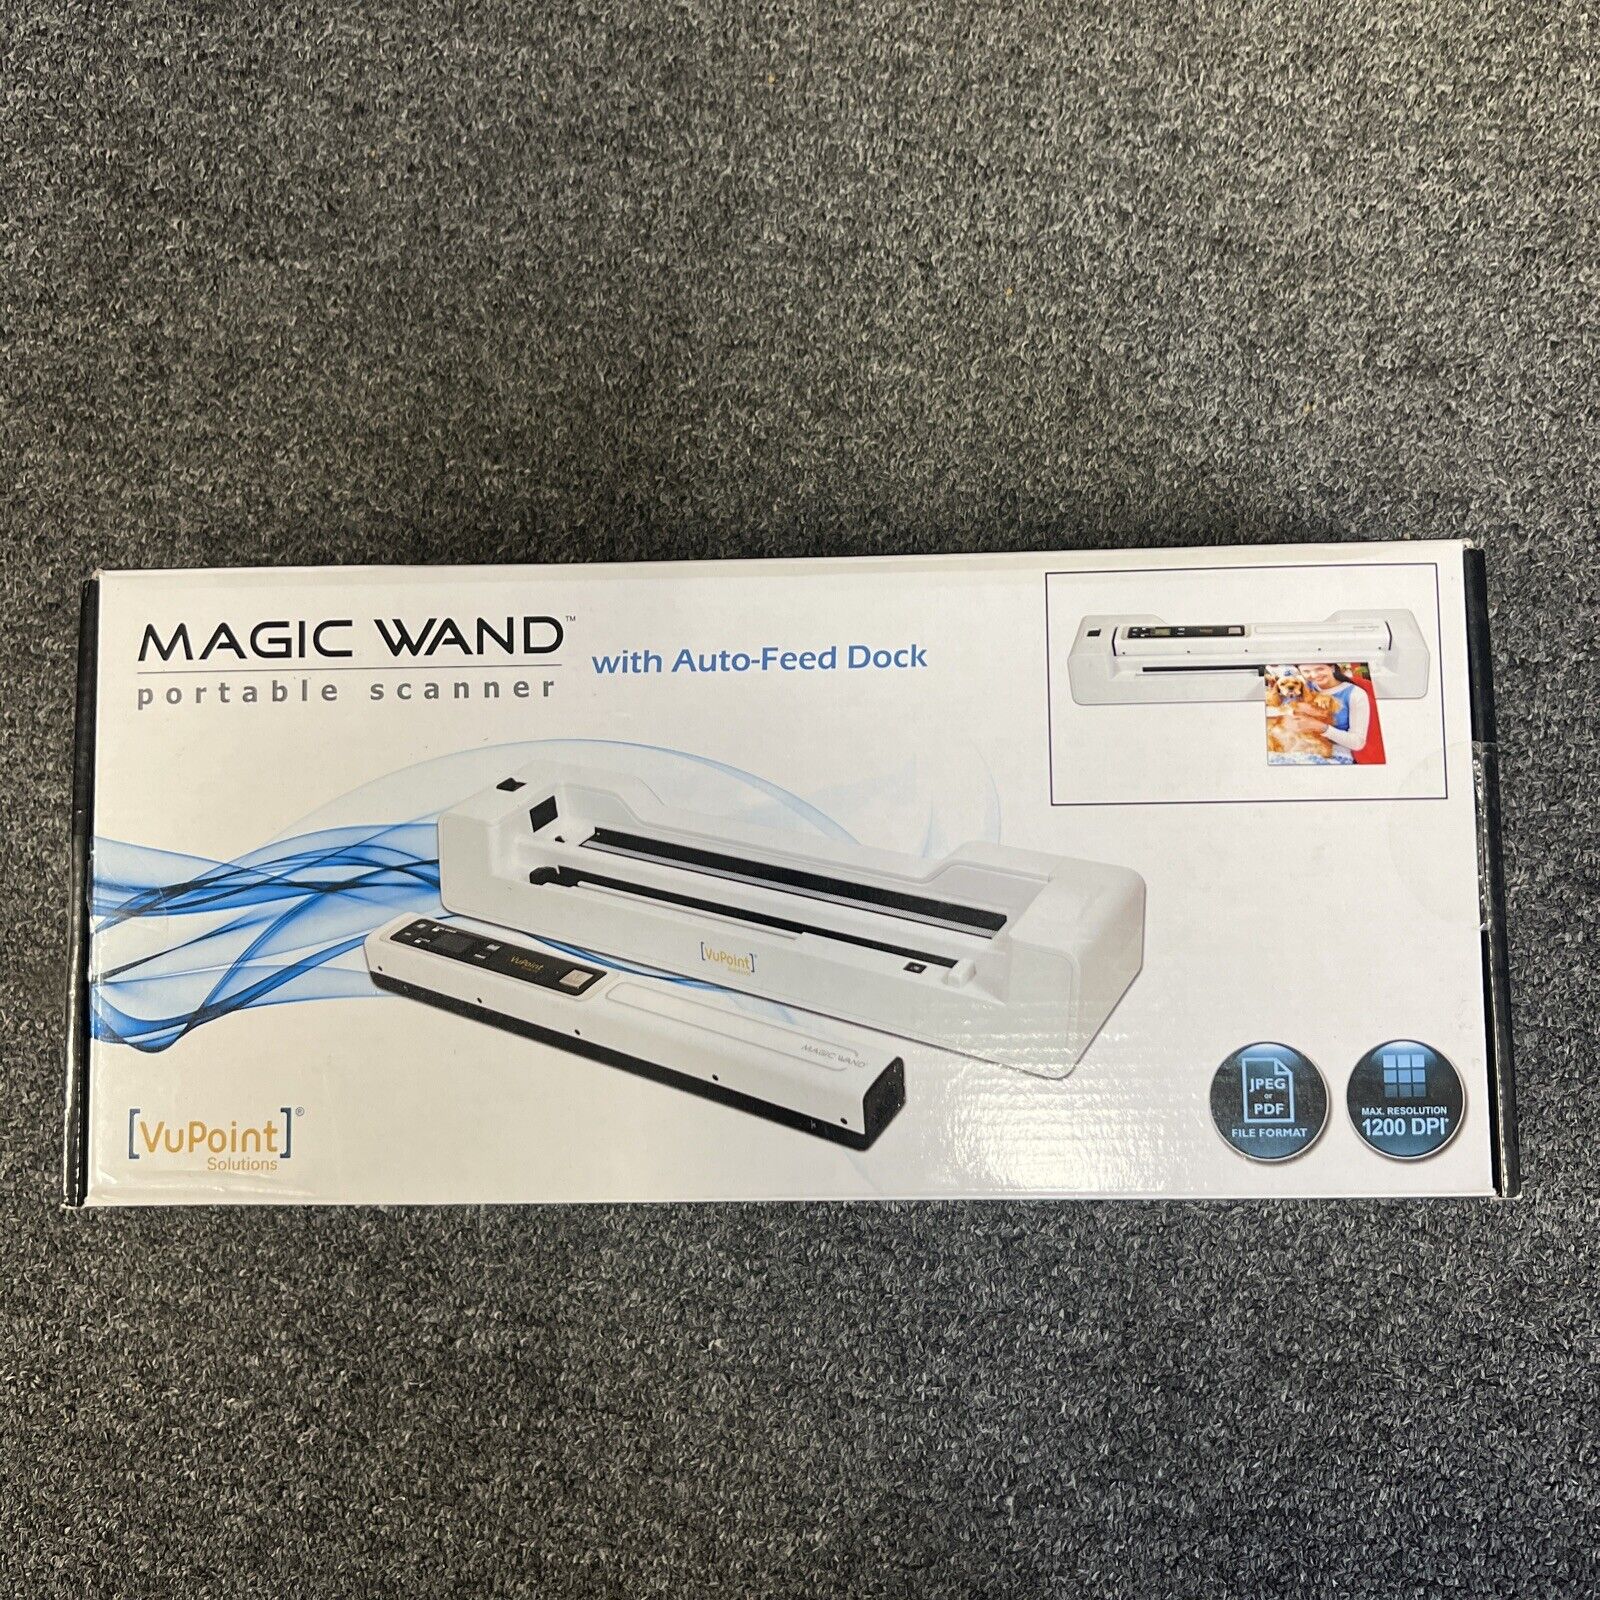 VuPoint Magic Wand Portable Scanner with Auto-Feed Dock PDS-ST450-VP NOB